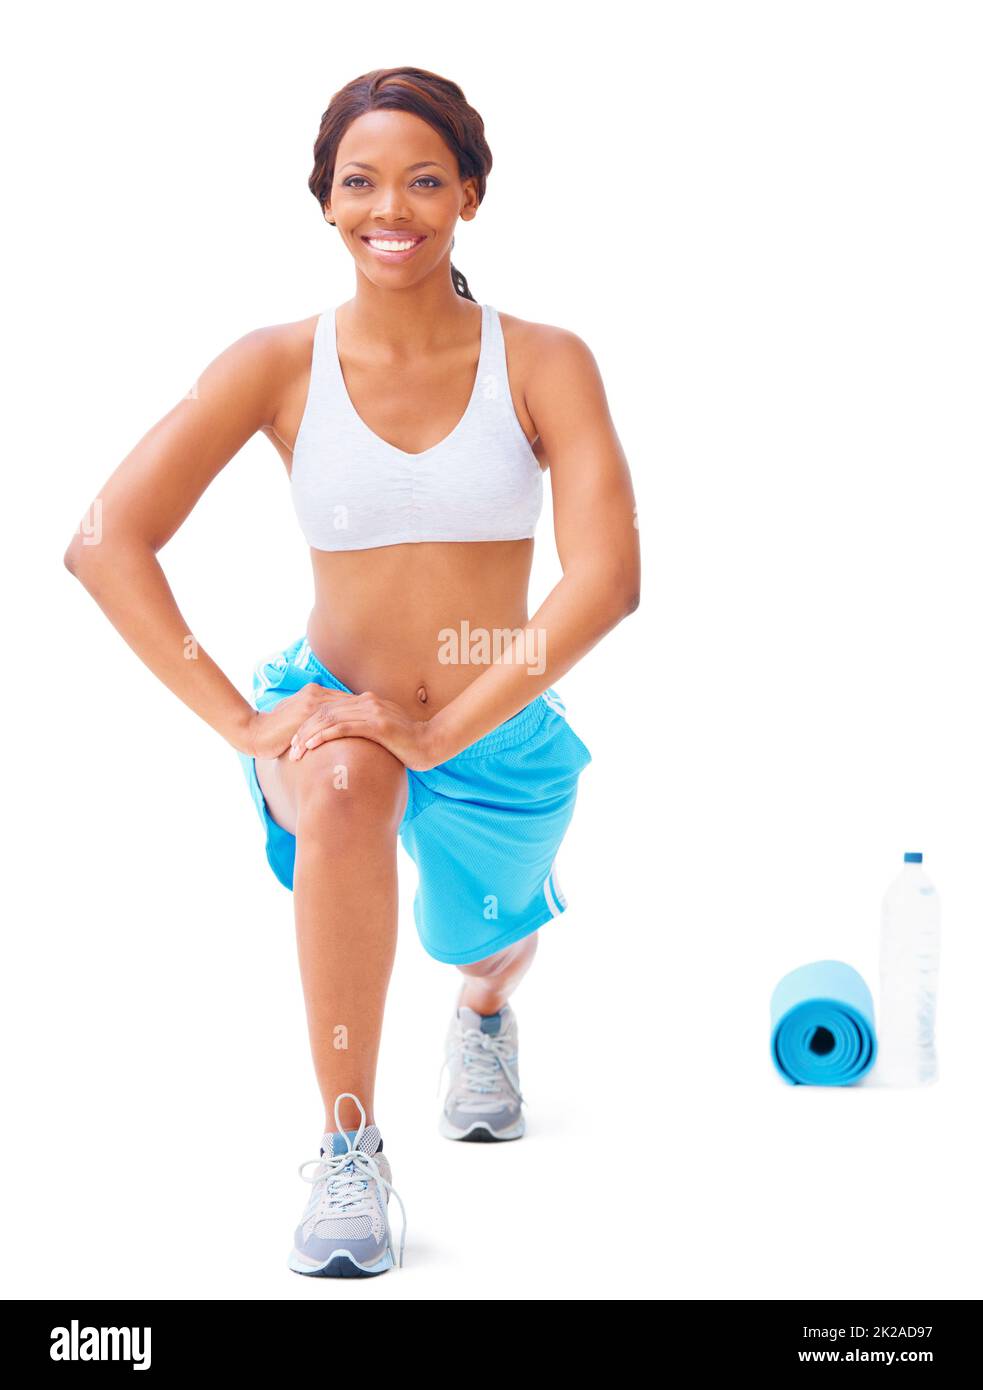 Stretching those muscles. Young african american woman stretching against a white background. Stock Photo